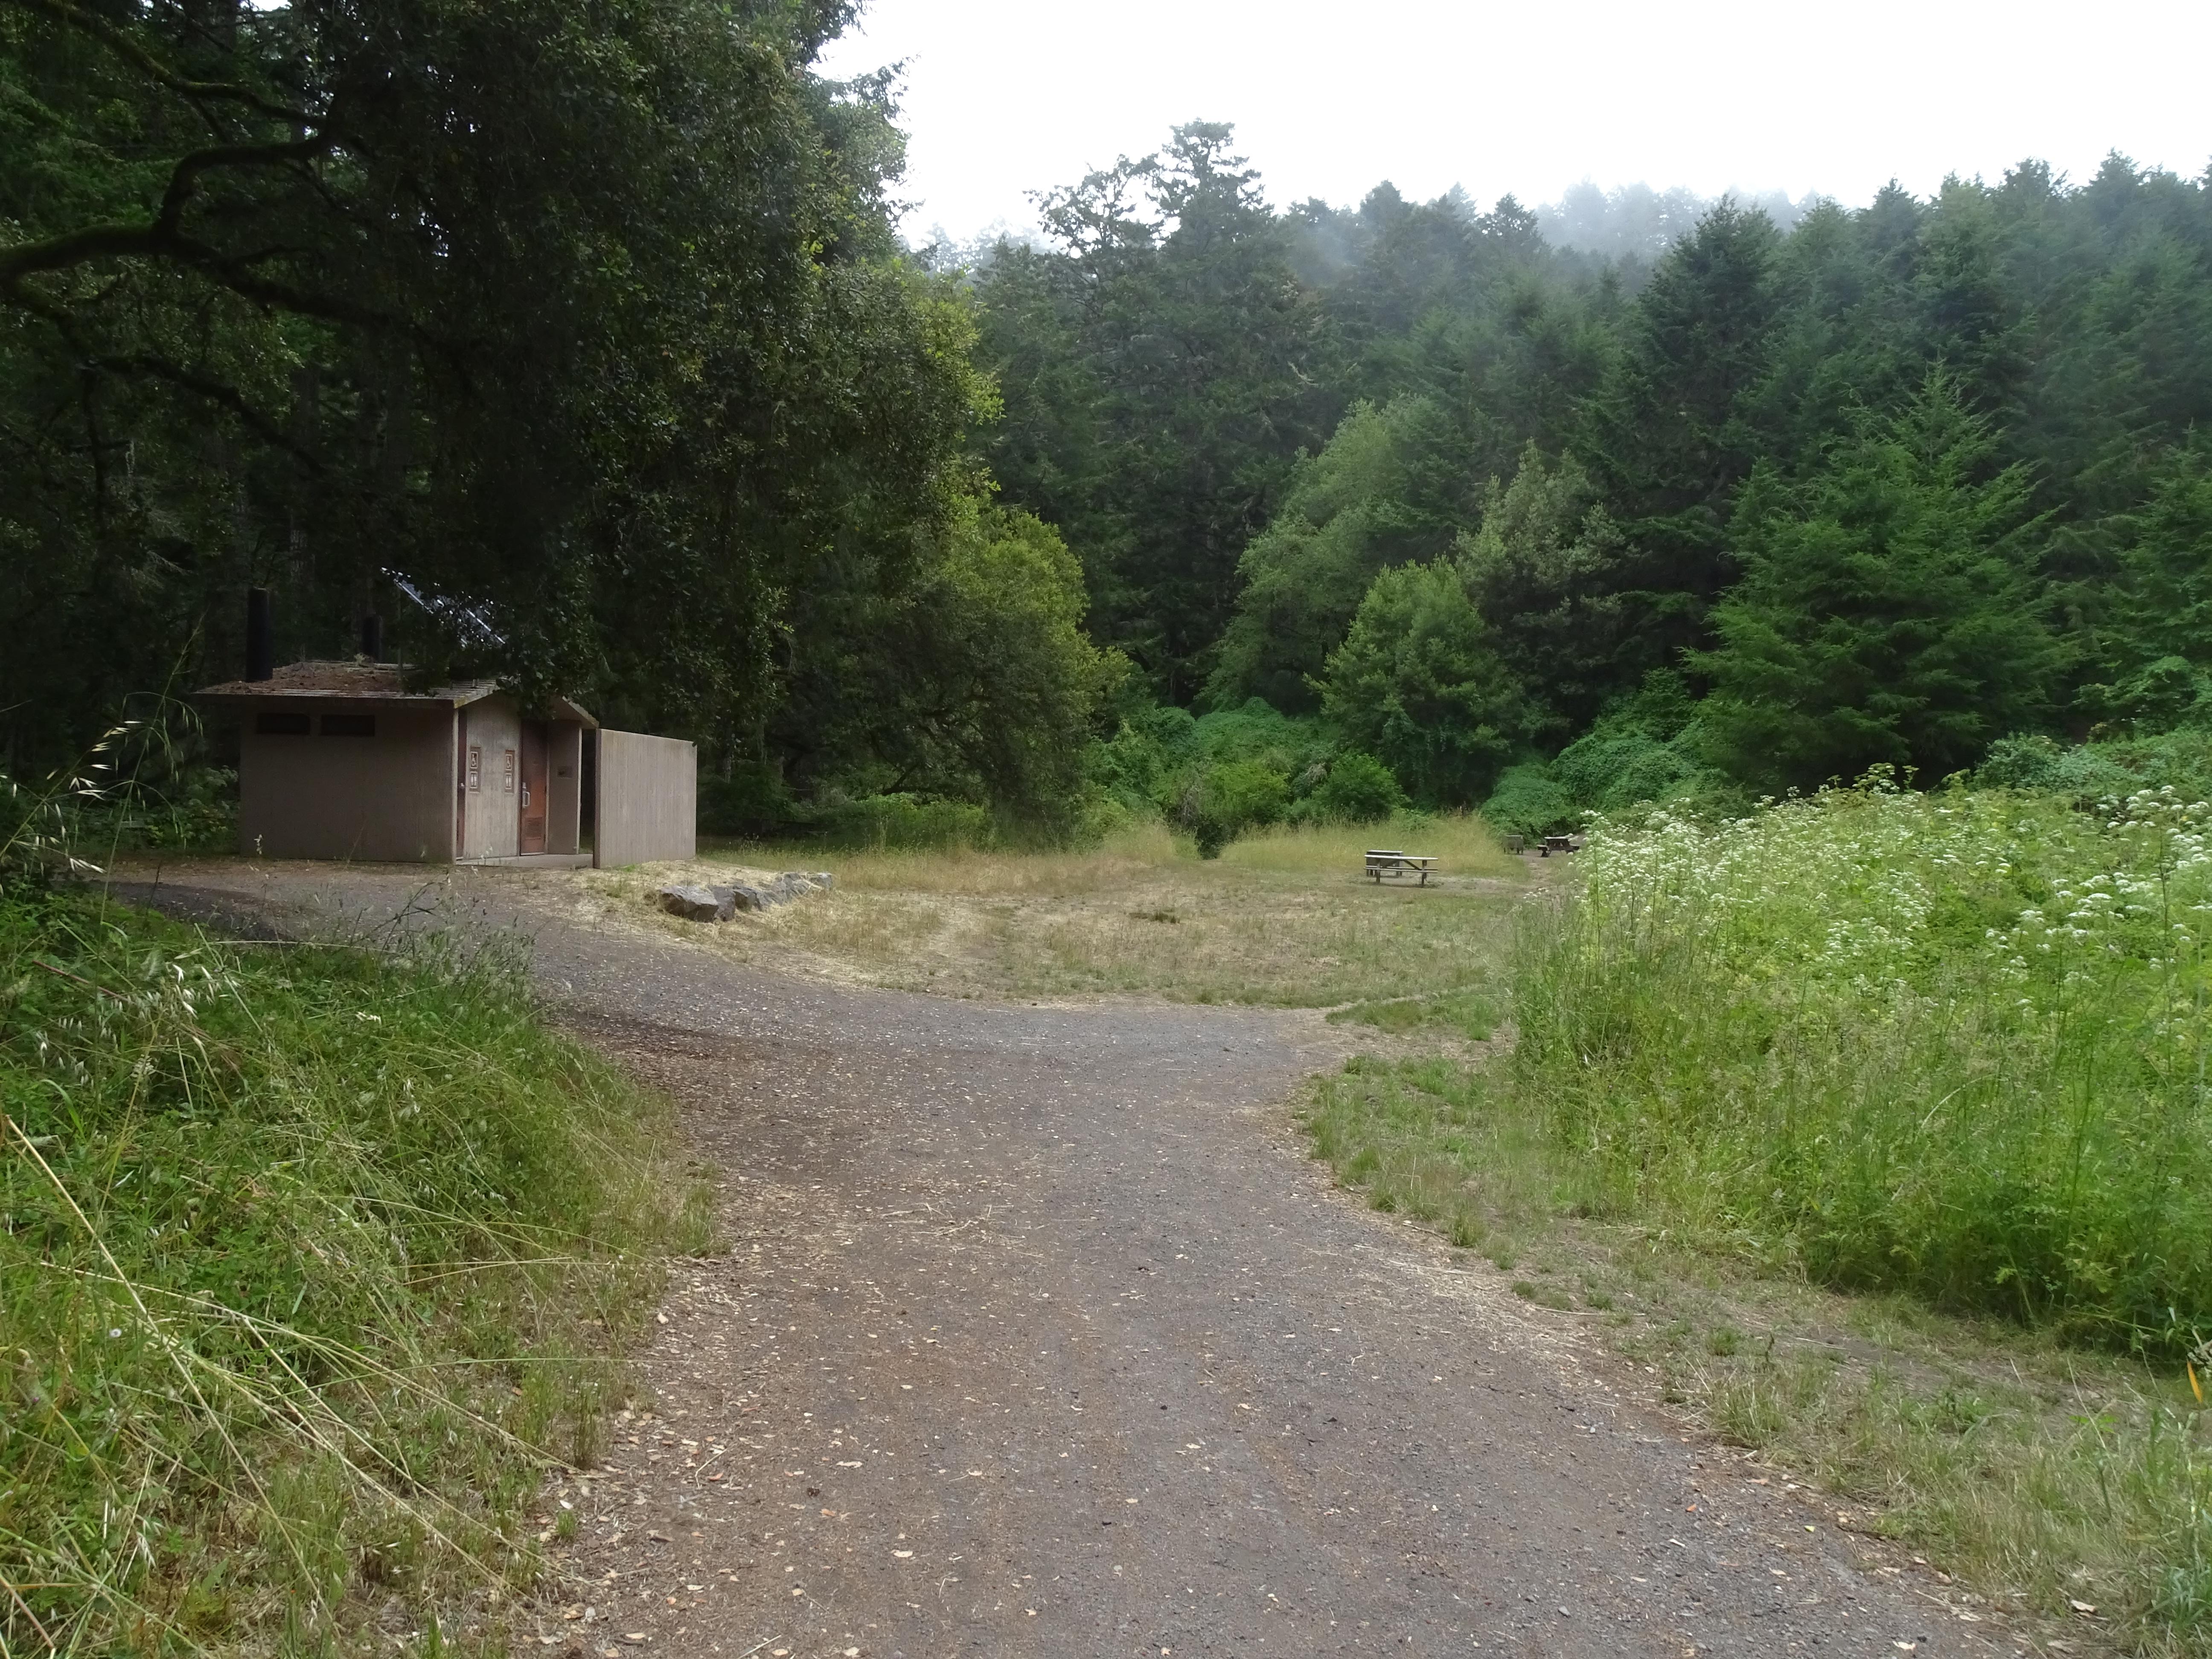 In a wooded valley, a leads into a campground with a vault toilet building under trees on the left.